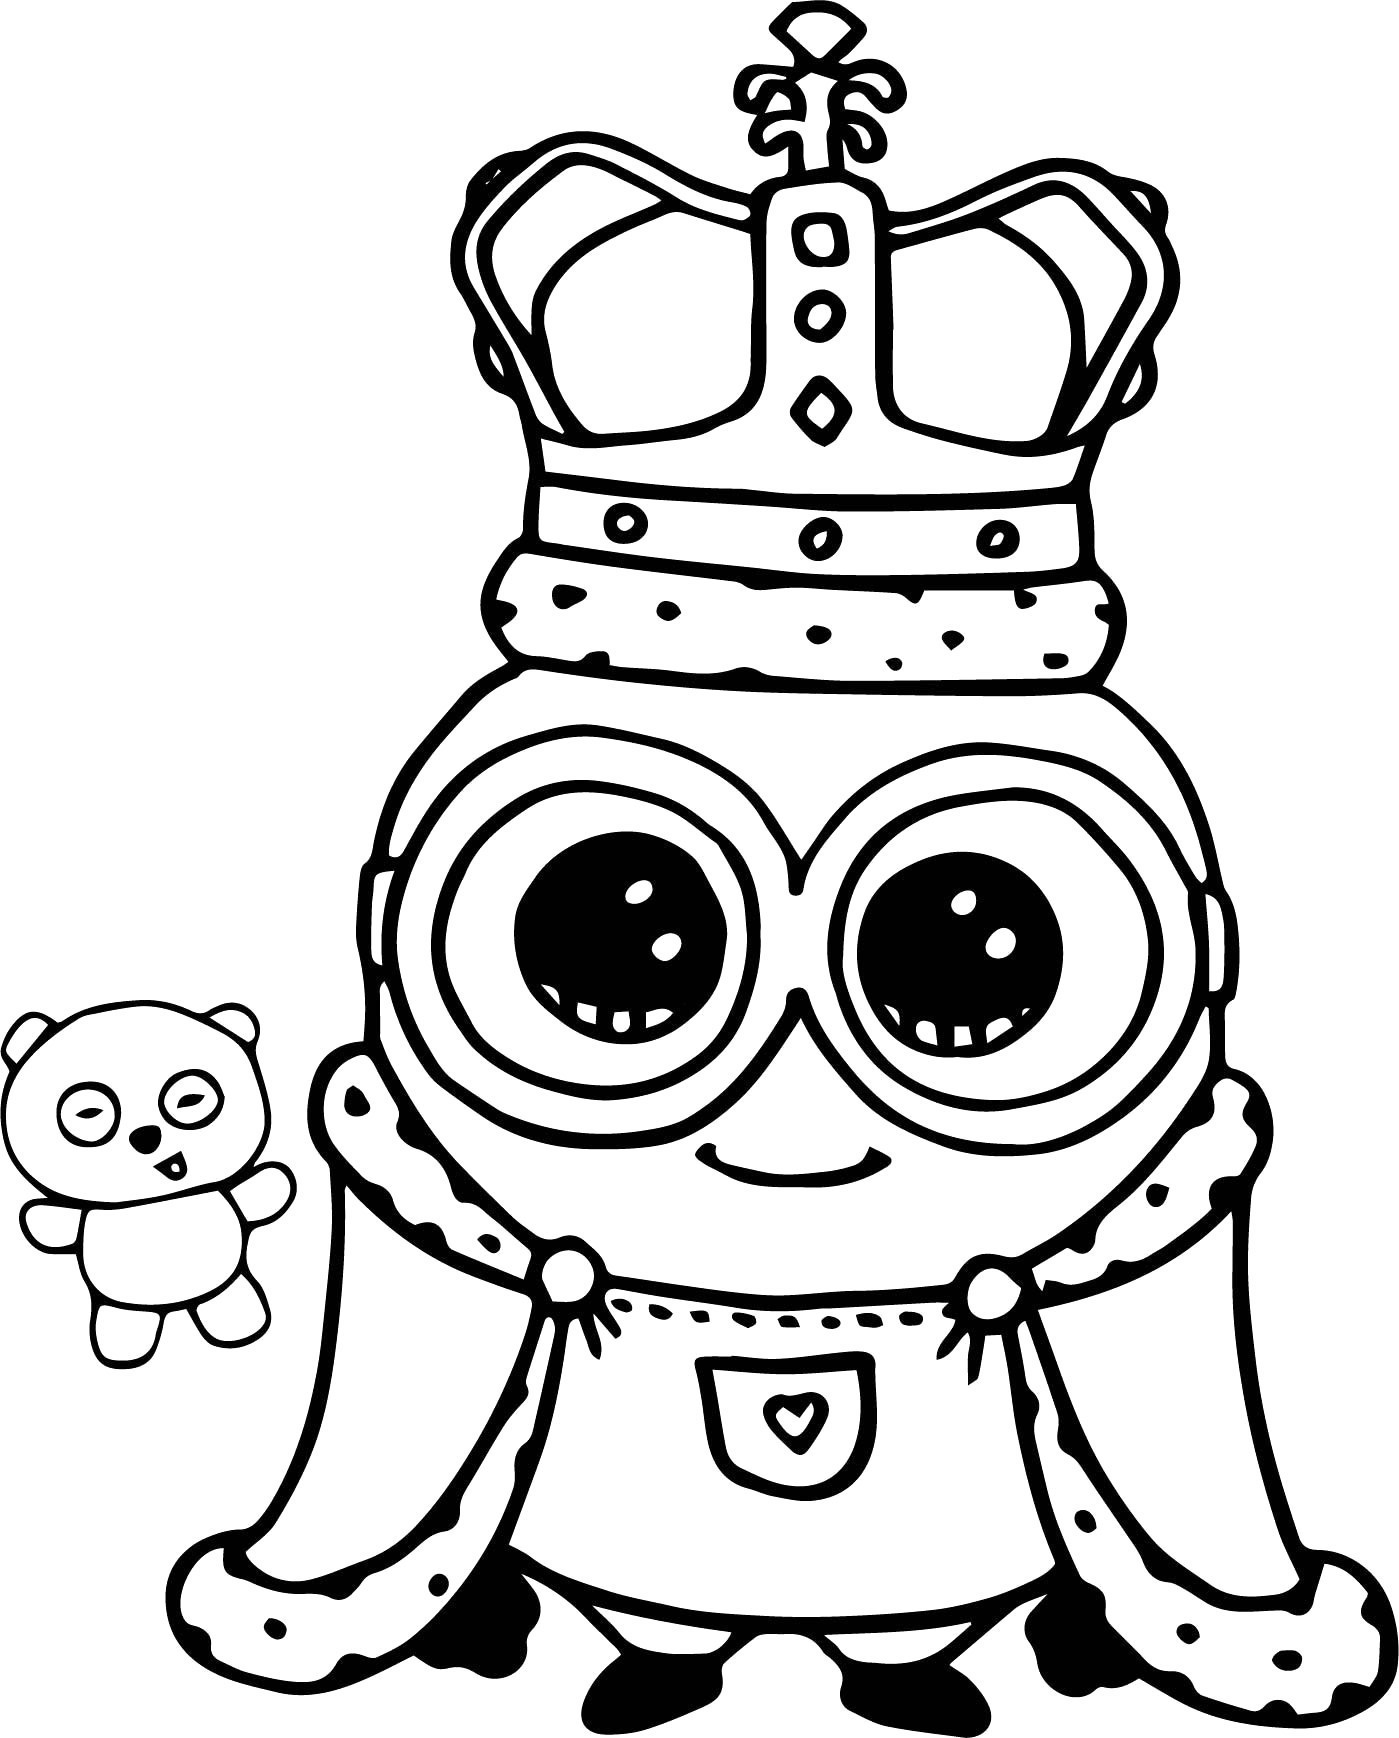 Despicable Coloring Pages Coloring Pages Of Minions Bob New Kevin Despicable Me 2 Page Minion